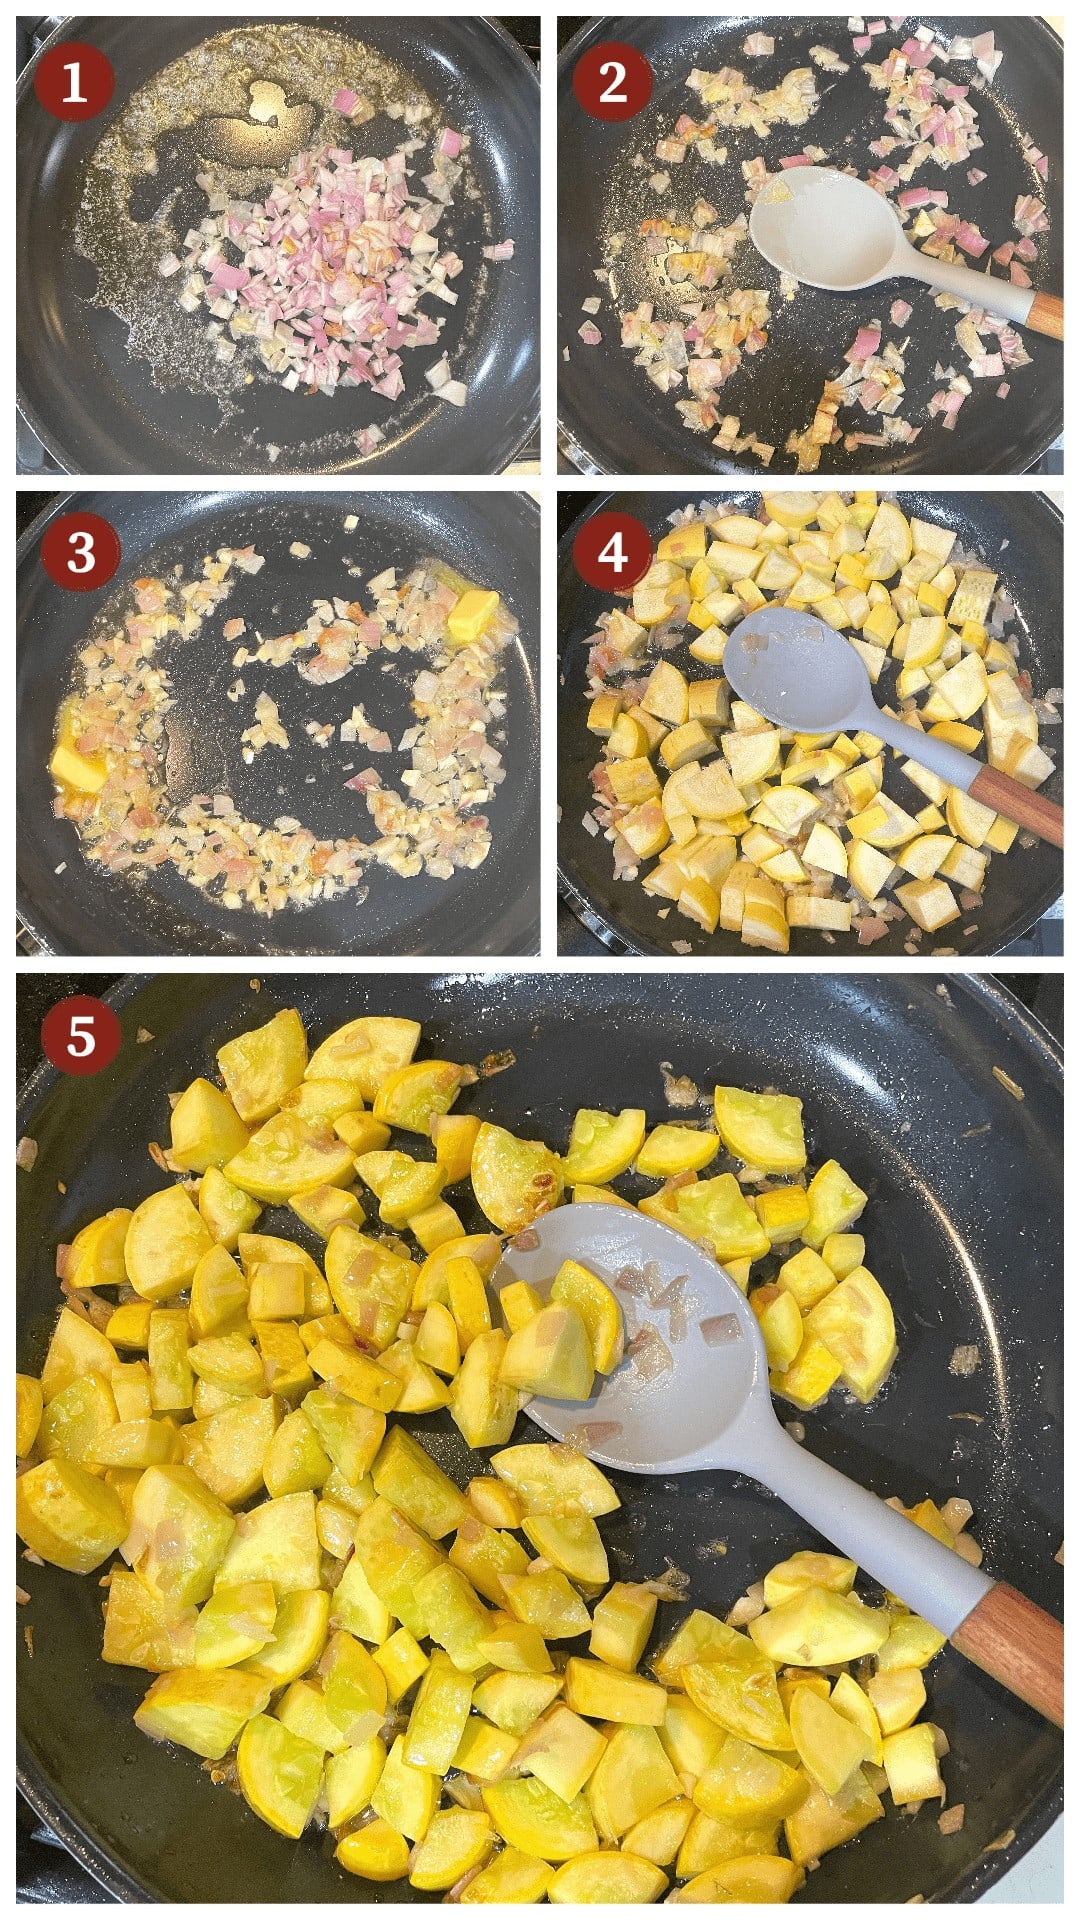 A collage of images showing how to make sauteed squash, steps 1-5.